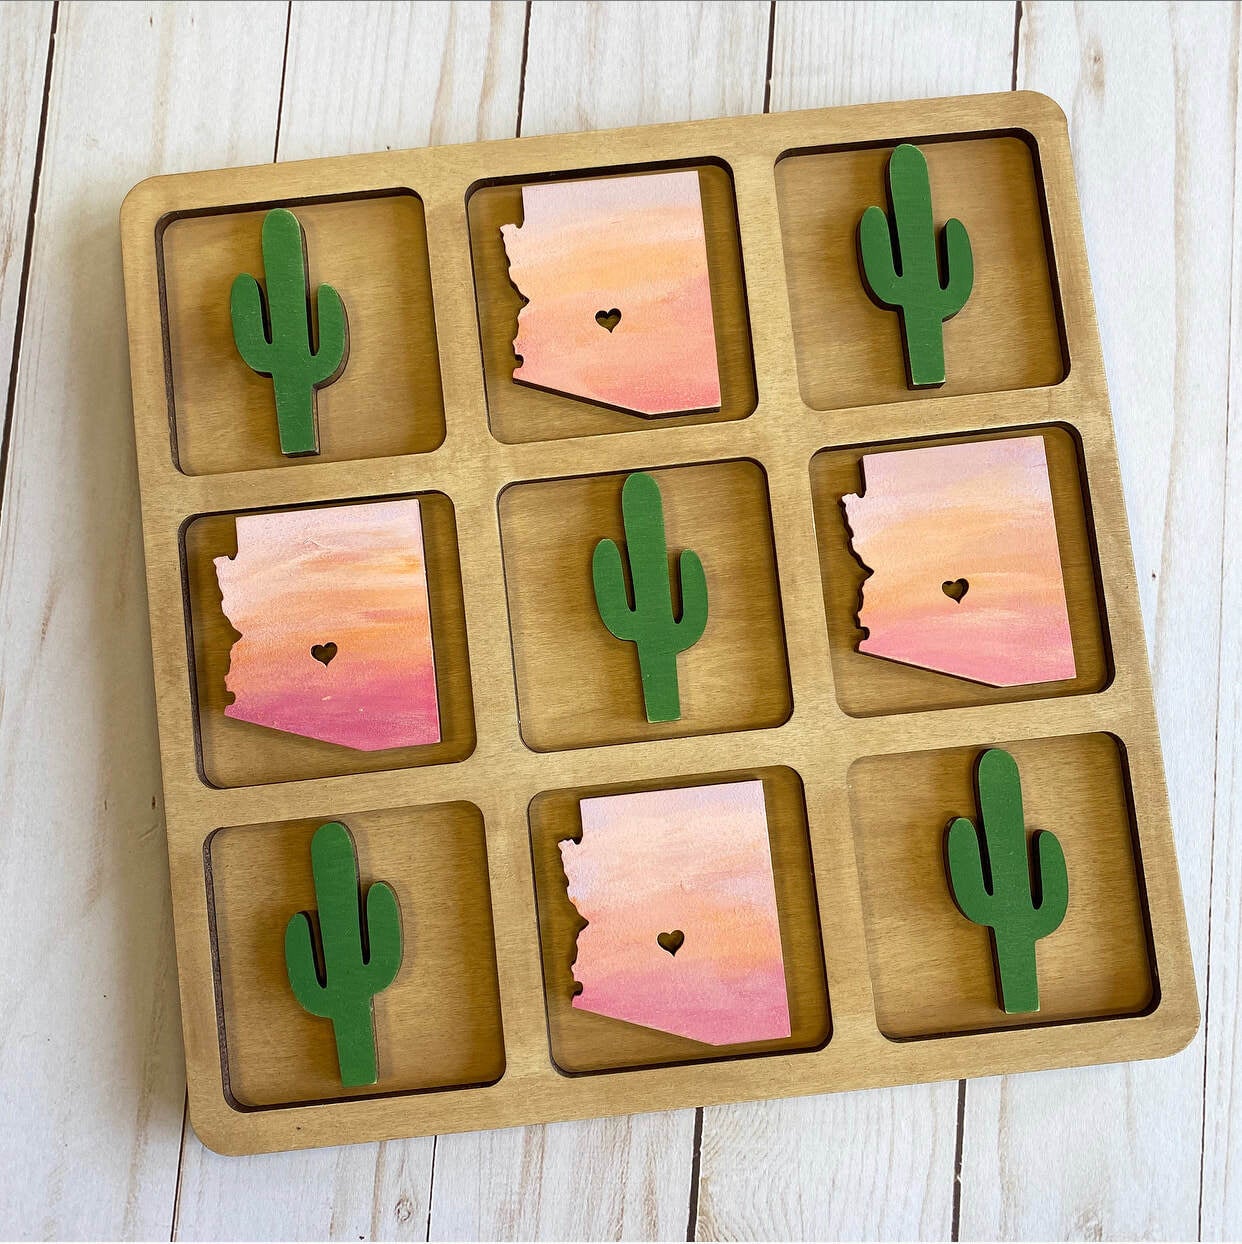 Custom Tic Tac Toe Board  Words with Boards - Words with Boards, LLC